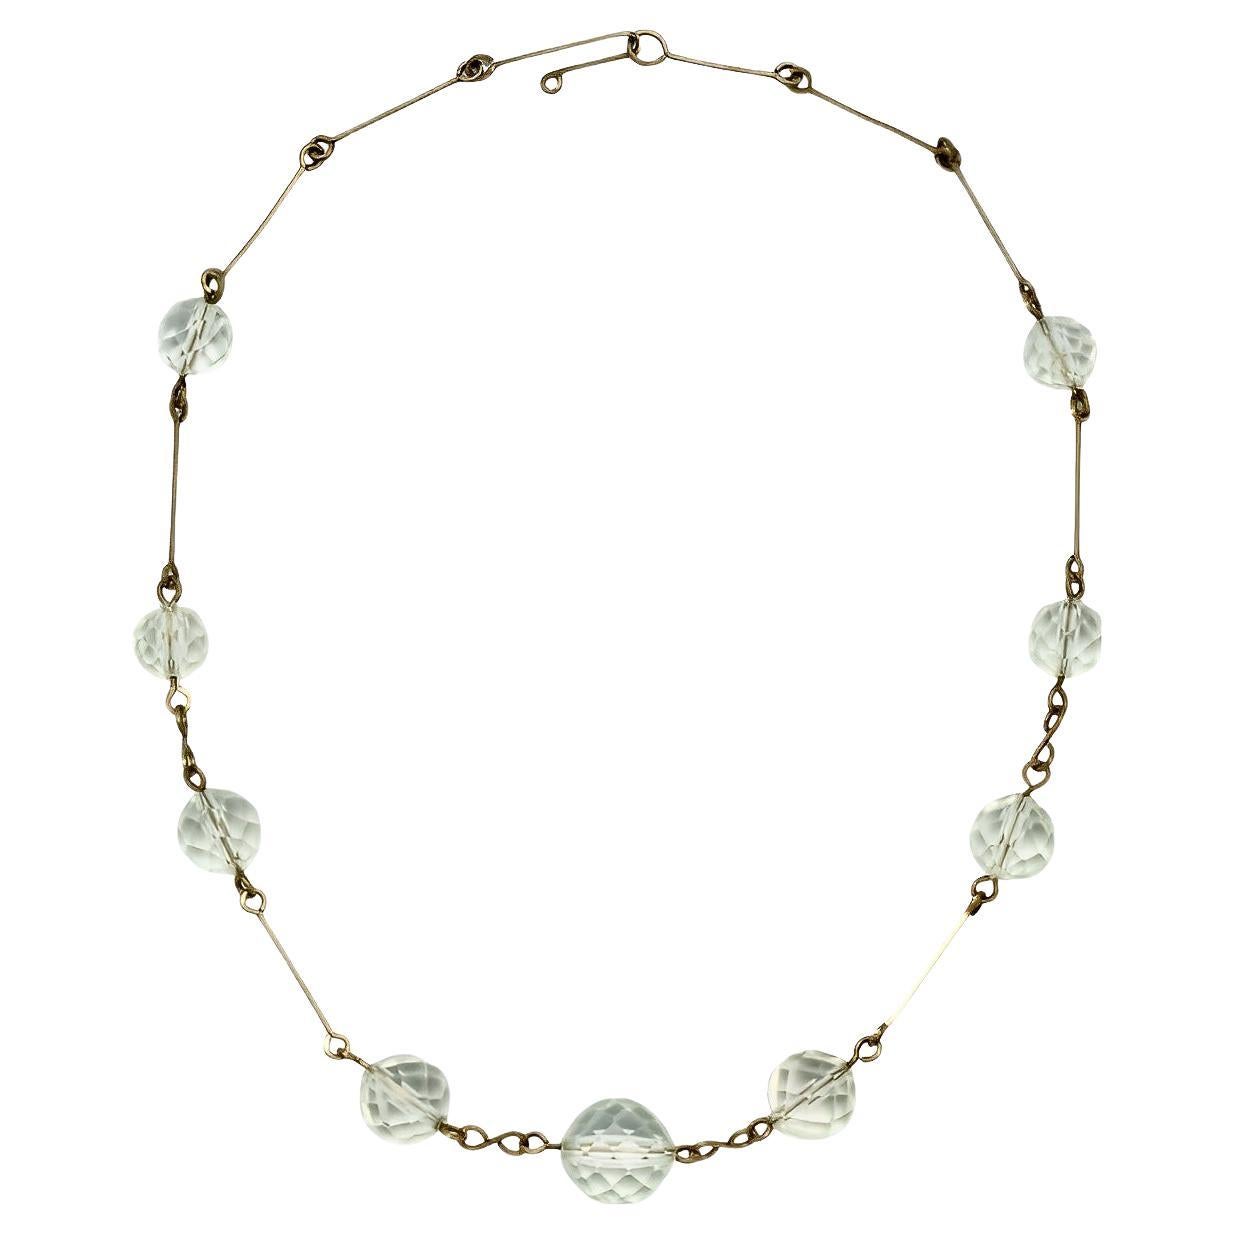 Art Deco Gold Tone Wire Necklace with Nine Faceted Crystal Beads circa 1930s